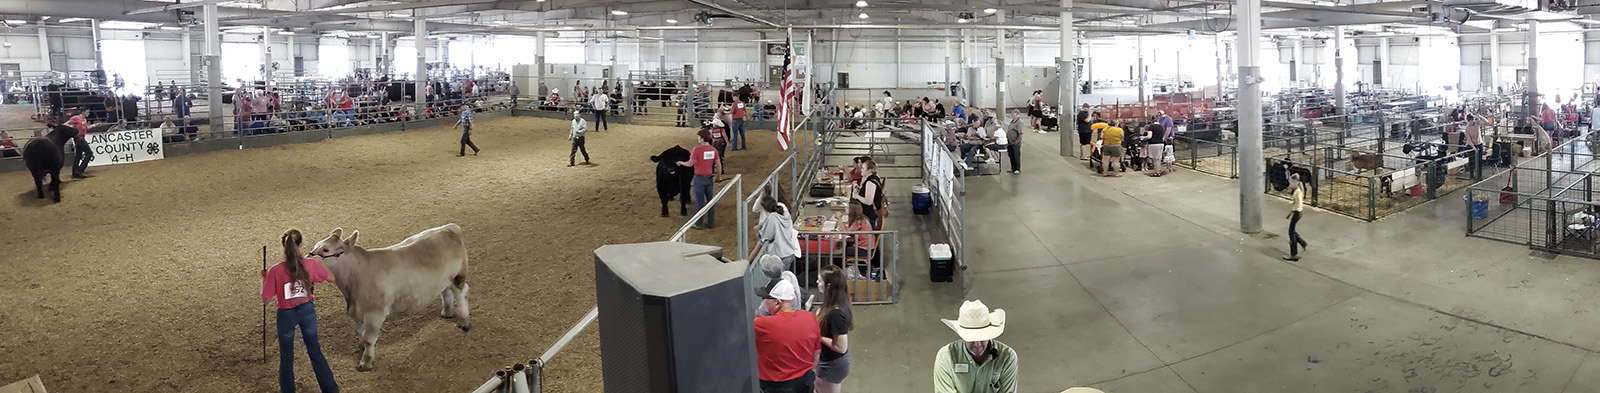 Pavilion 1 at 2022 Lancaster County Super Fair during 4-H/FFA Beef Show